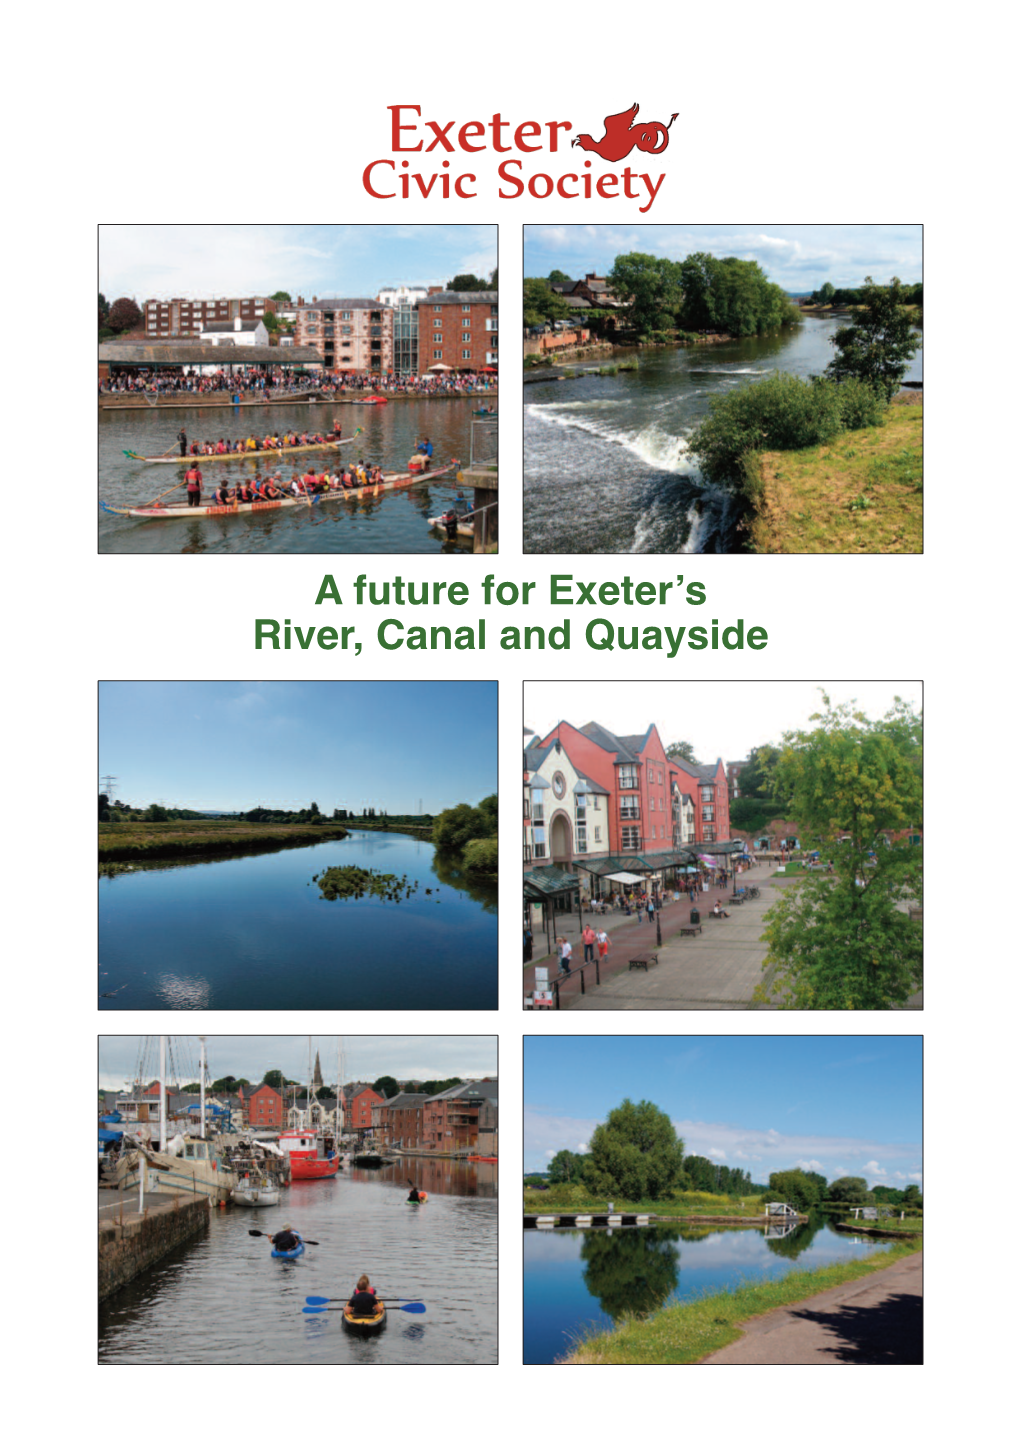 A Future for Exeter's River, Canal and Quayside